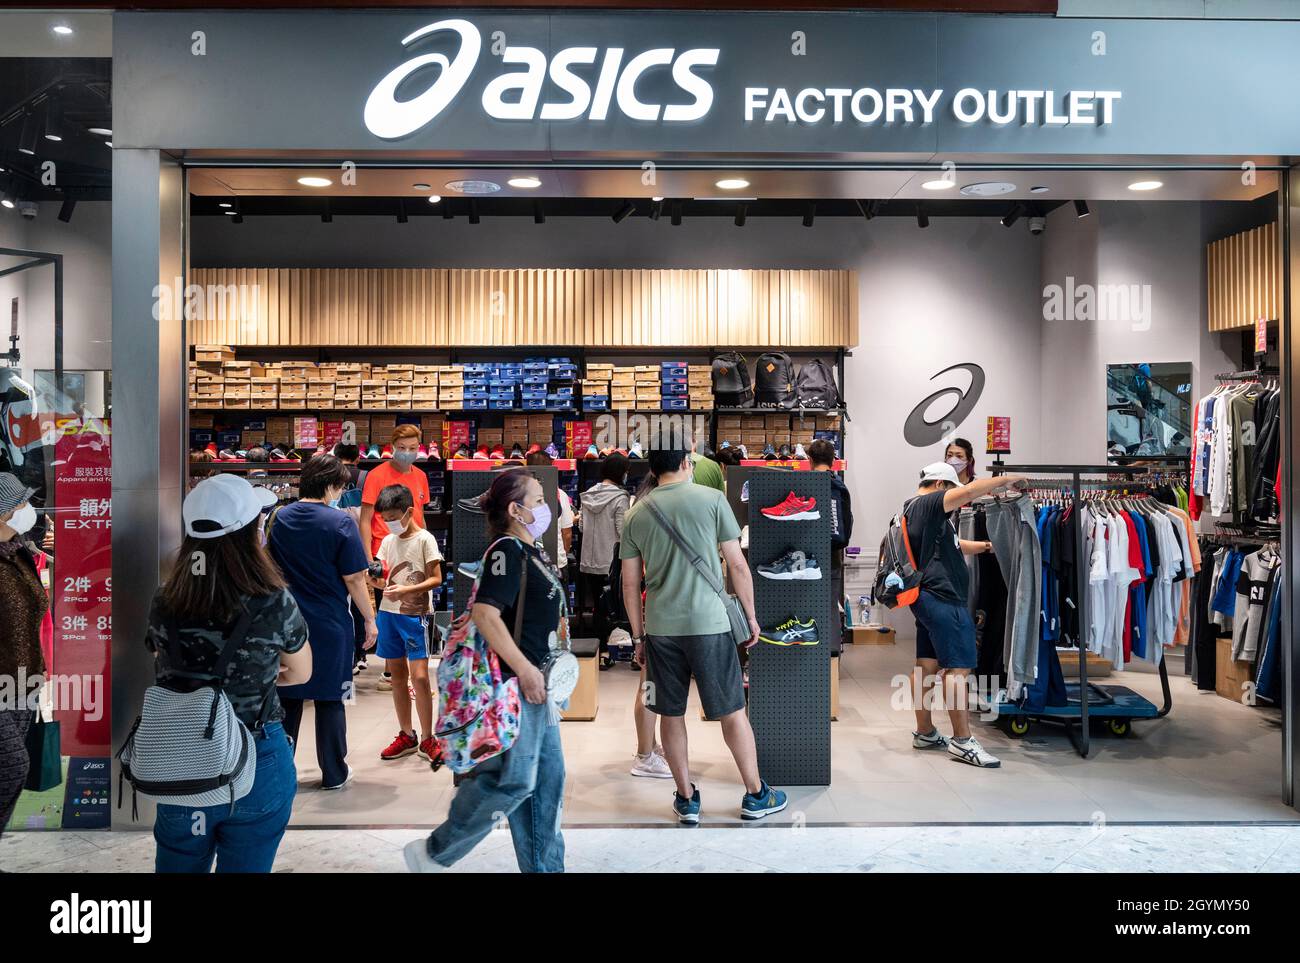 asics outlet shop, great trade Hit A 75% Discount - statehouse.gov.sl